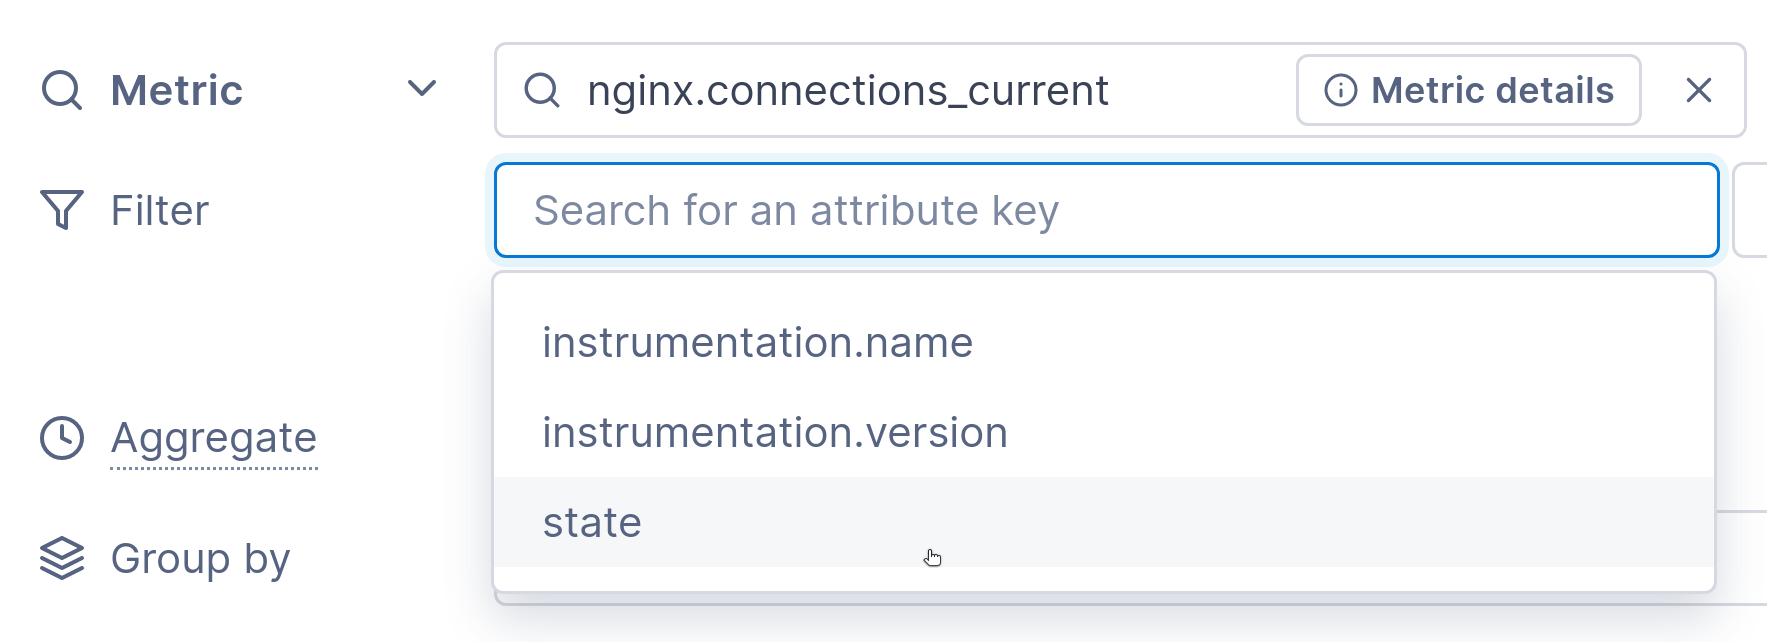 current-connections-attribute-key-state-image